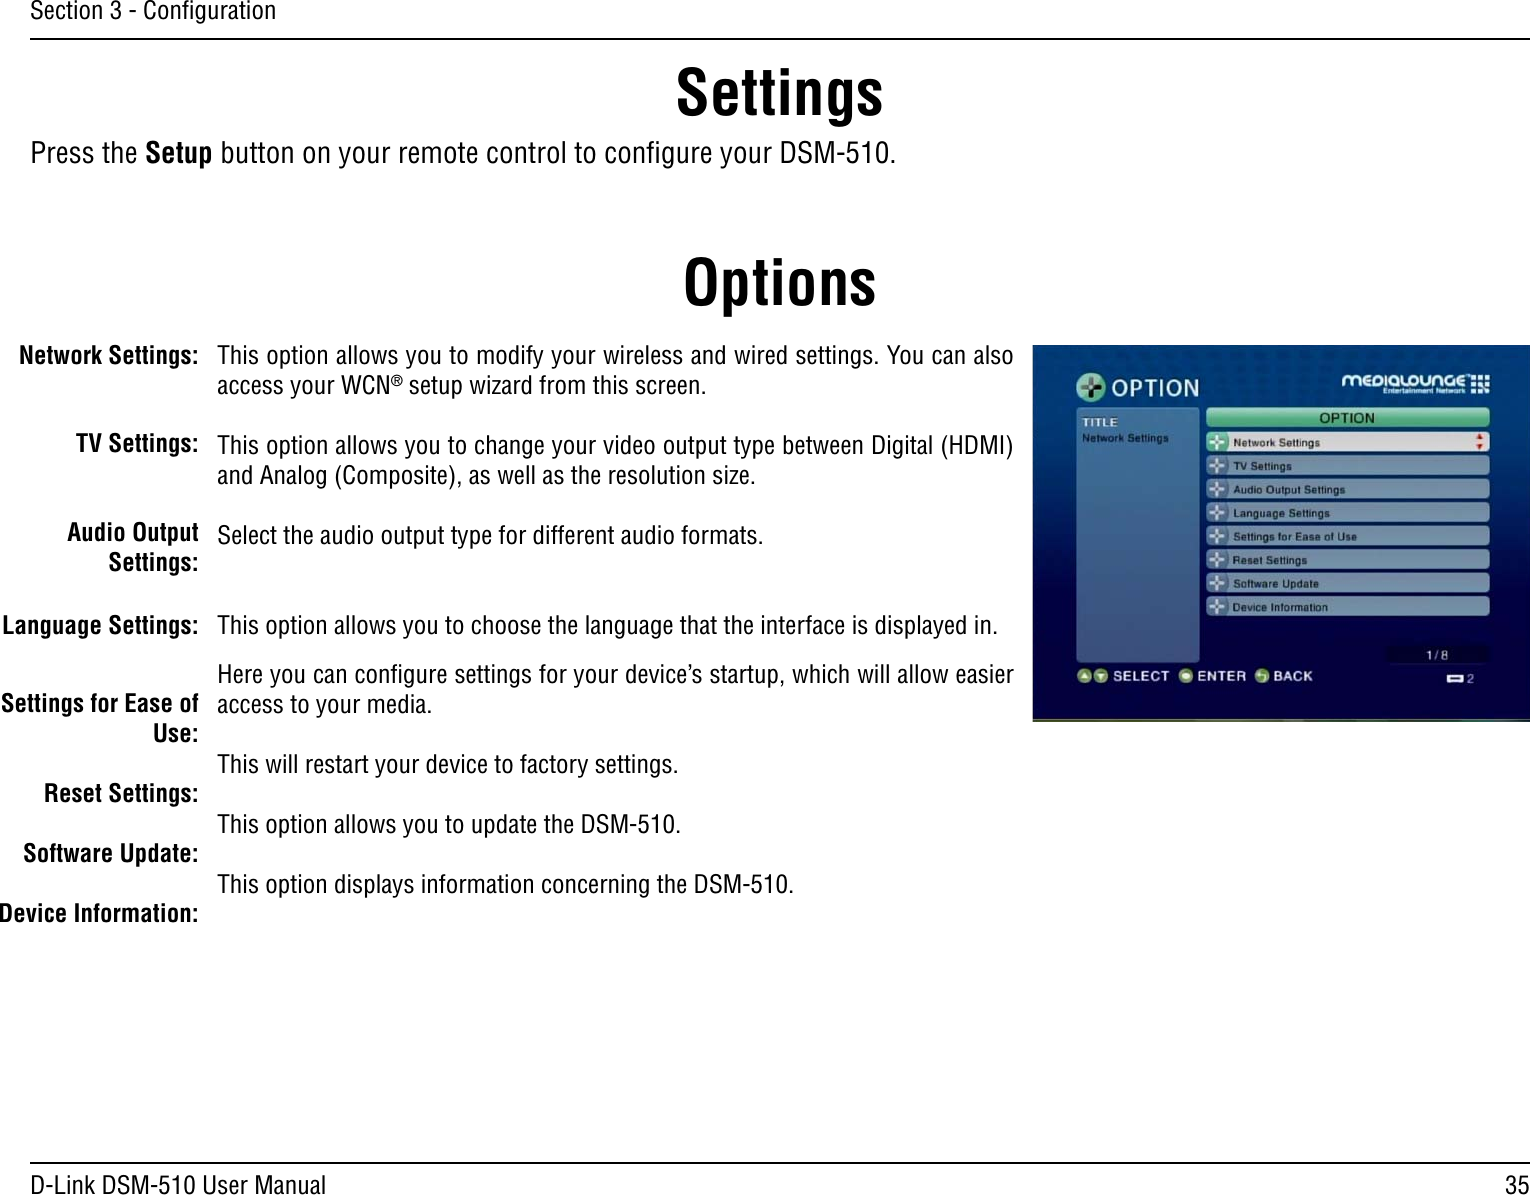 35D-Link DSM-510 User ManualSection 3 - ConﬁgurationNetwork Settings:TV Settings:Audio Output Settings:Language Settings:Settings for Ease of Use:Reset Settings:Software Update:Device Information:This option allows you to modify your wireless and wired settings. You can also access your WCN® setup wizard from this screen.This option allows you to change your video output type between Digital (HDMI) and Analog (Composite), as well as the resolution size.Select the audio output type for different audio formats. This option allows you to choose the language that the interface is displayed in.Here you can conﬁgure settings for your device’s startup, which will allow easier access to your media.This will restart your device to factory settings.This option allows you to update the DSM-510.This option displays information concerning the DSM-510.Press the Setup button on your remote control to conﬁgure your DSM-510.OptionsSettings